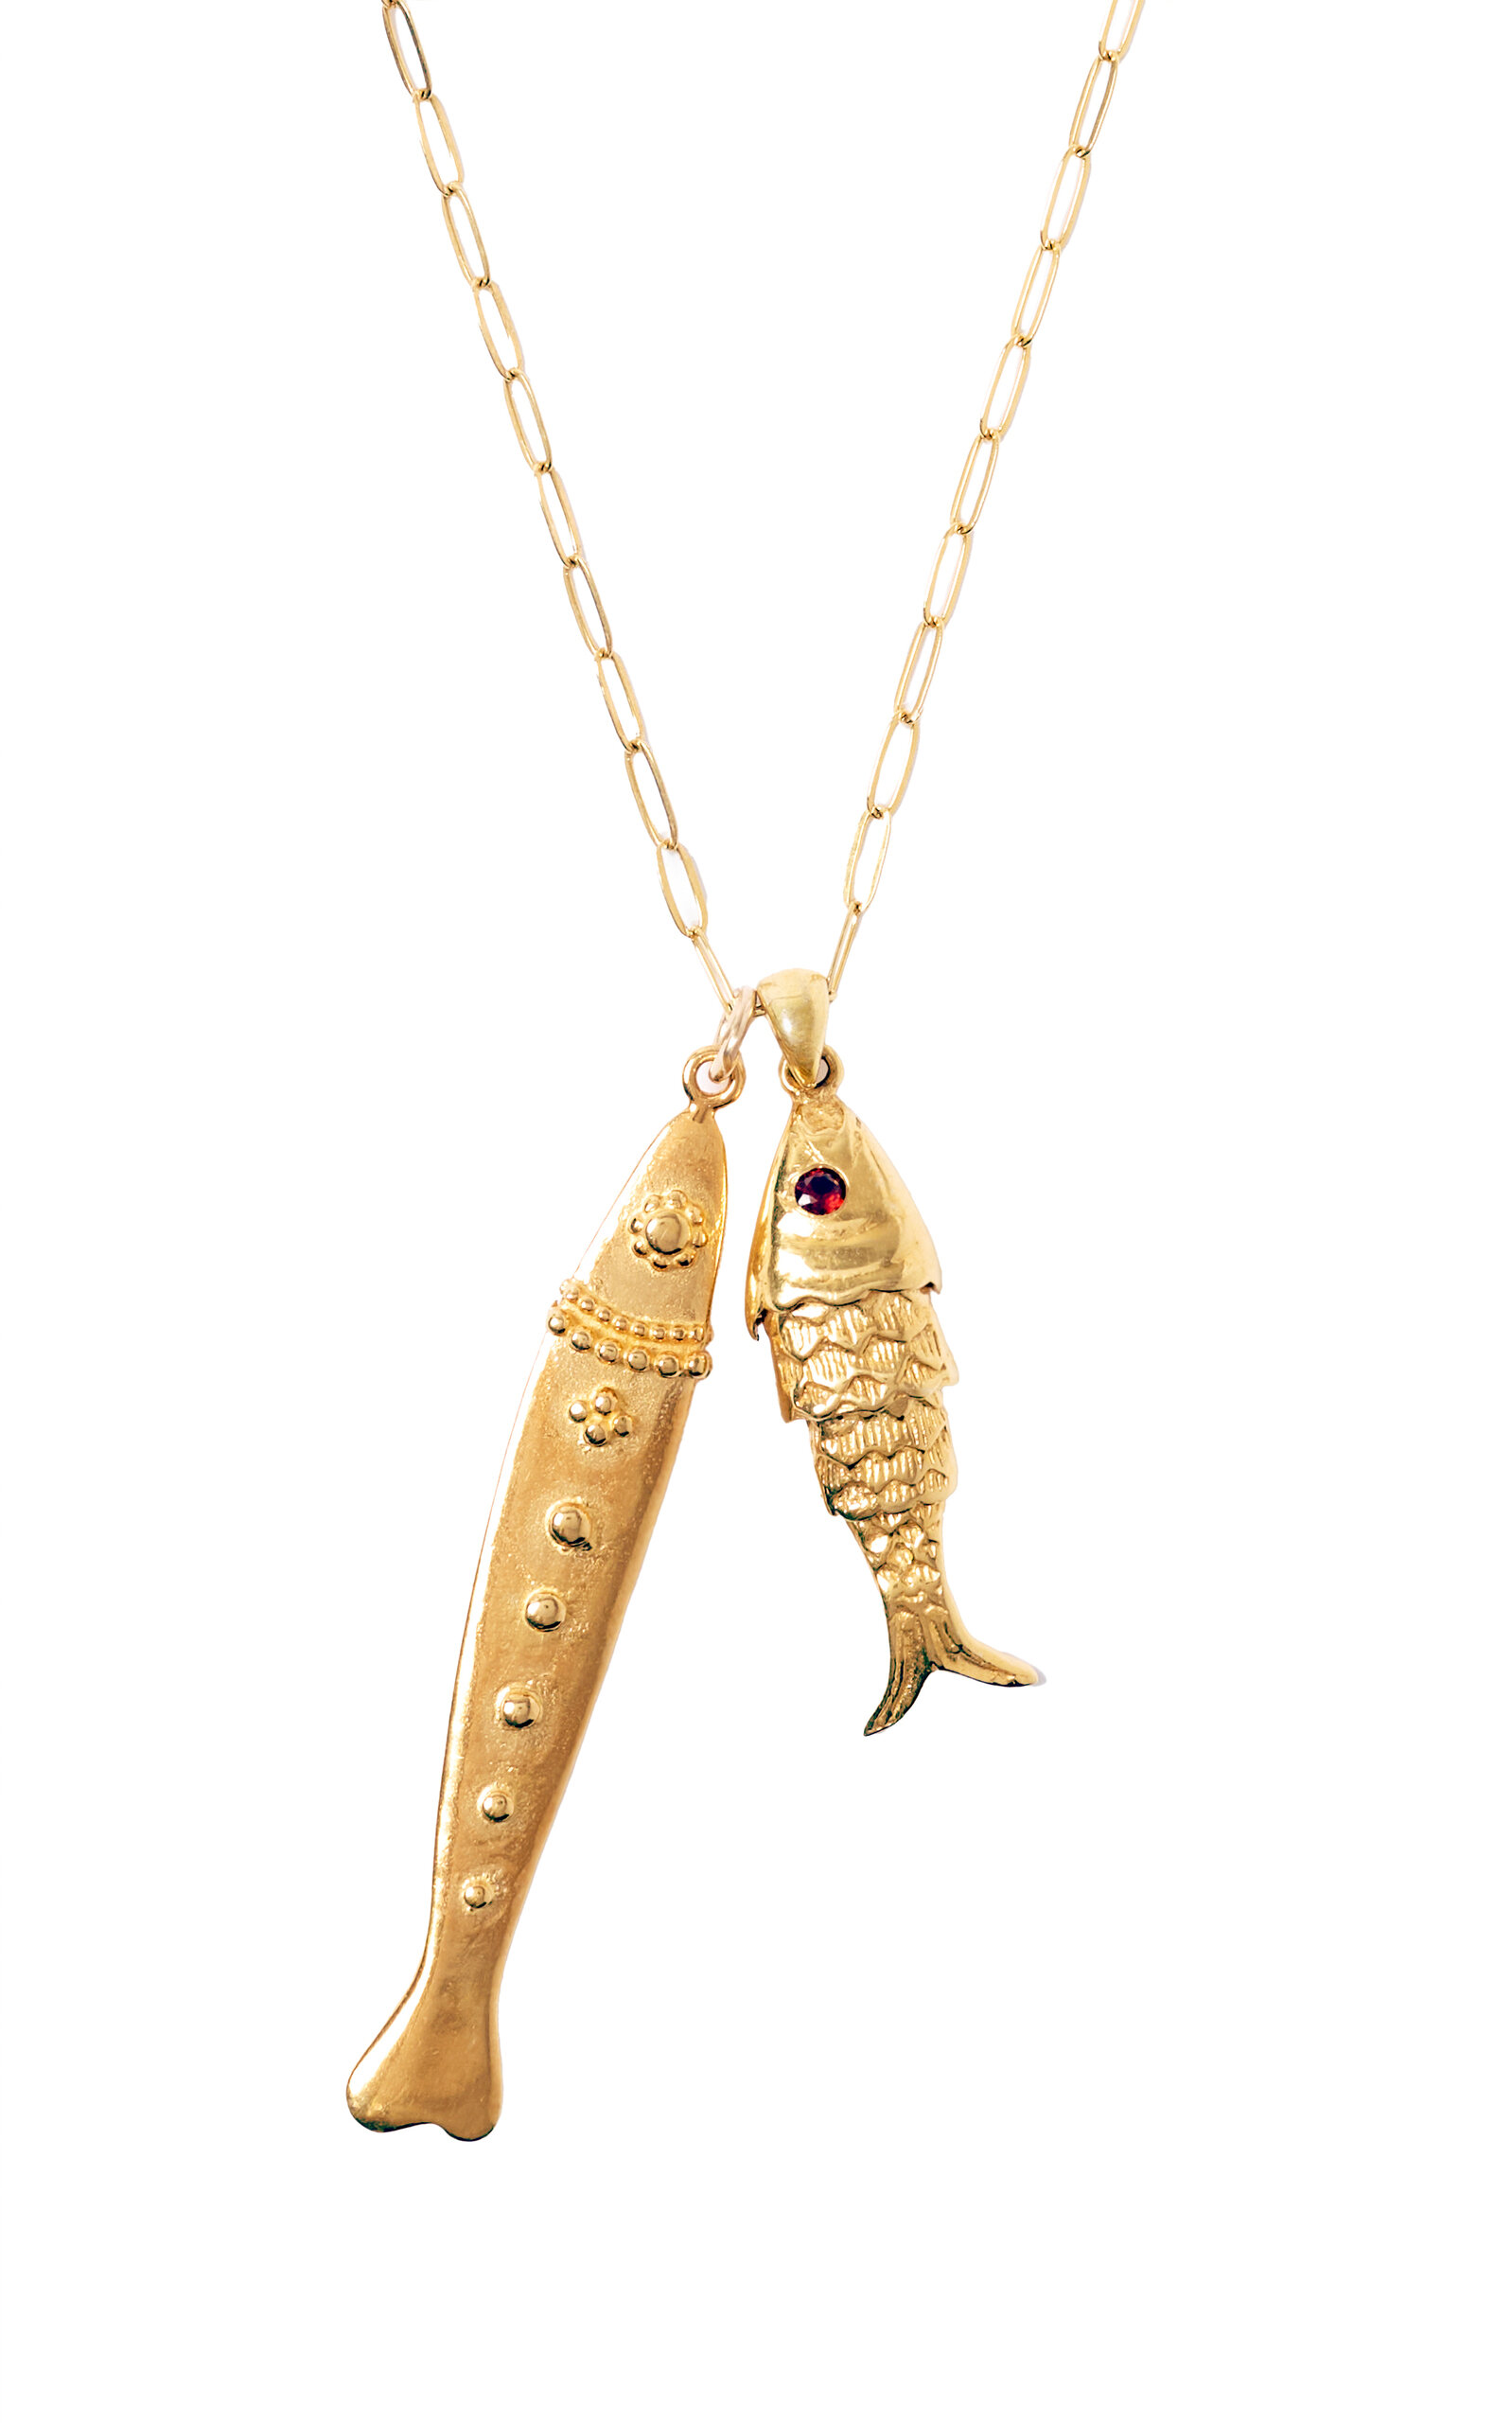 Exclusive Fisherman's 18K Gold-Plated Necklace